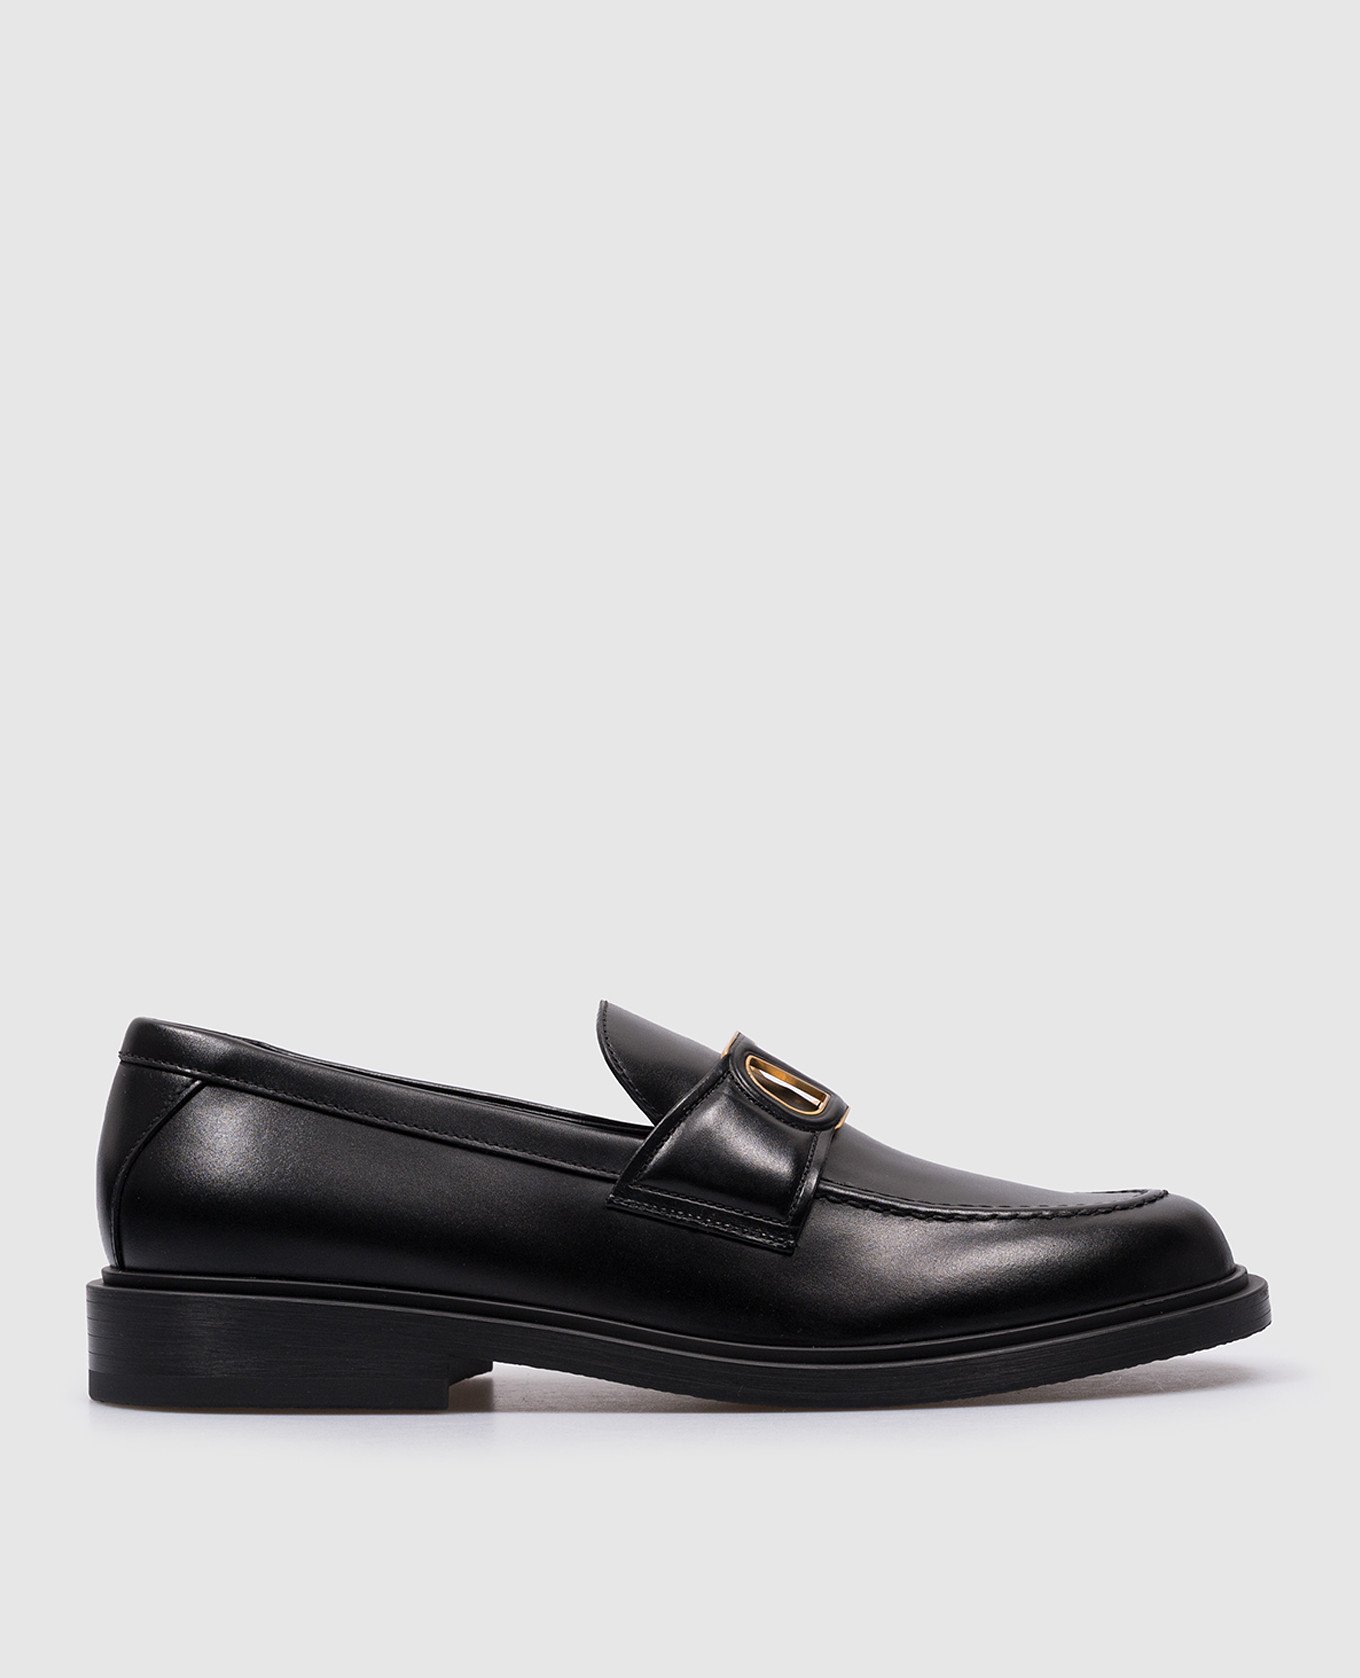 Black leather loafers with VLogo Signature logo